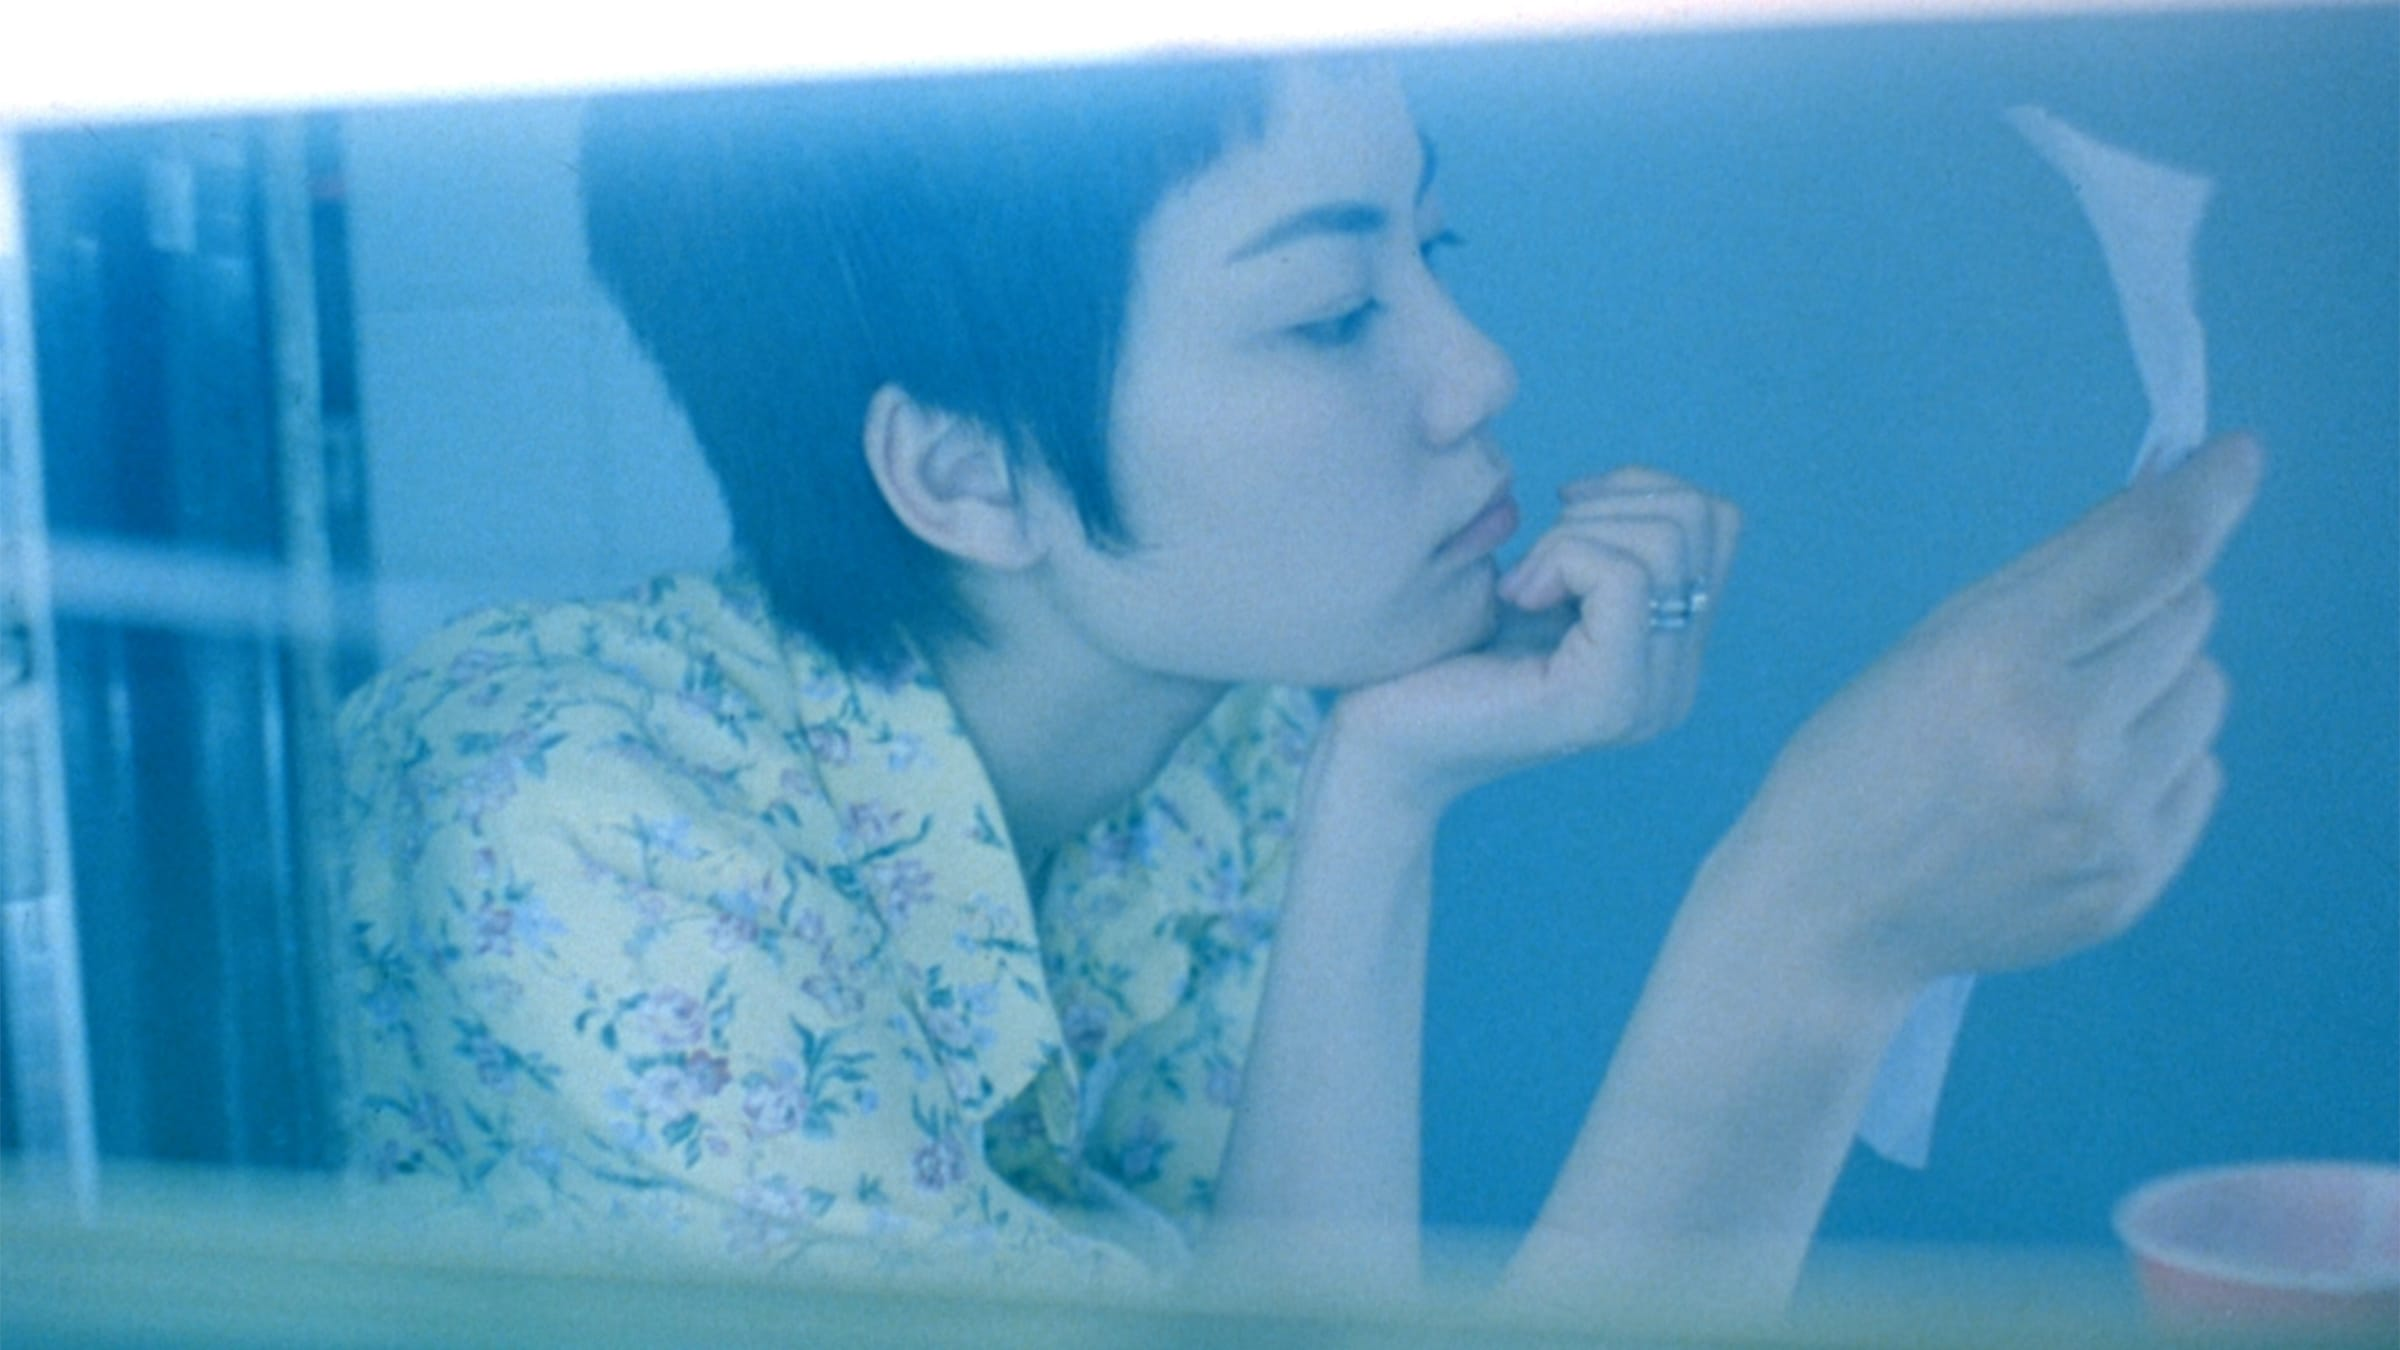 chungking express female character